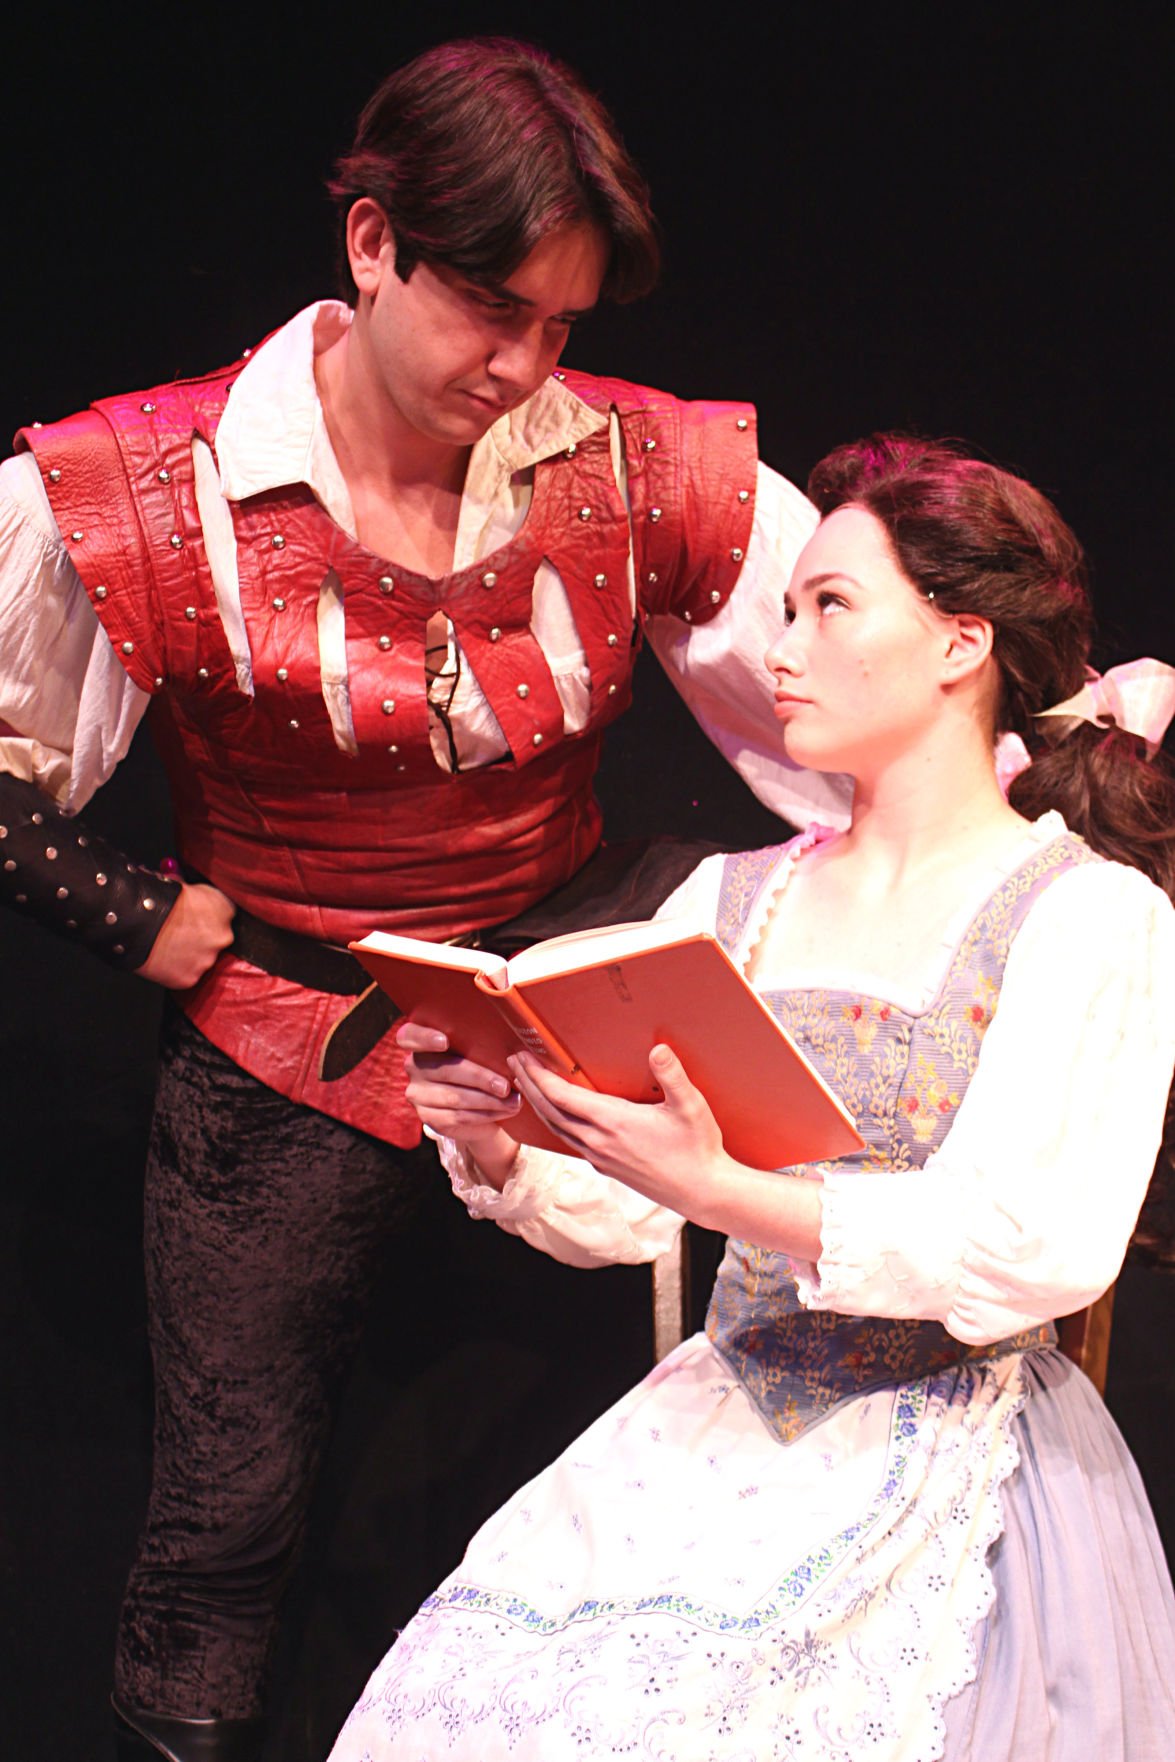 Theatre Baton Rouge S Beauty And The Beast Comes With Timely Lesson Love Overcomes Hate Arts Theadvocate Com